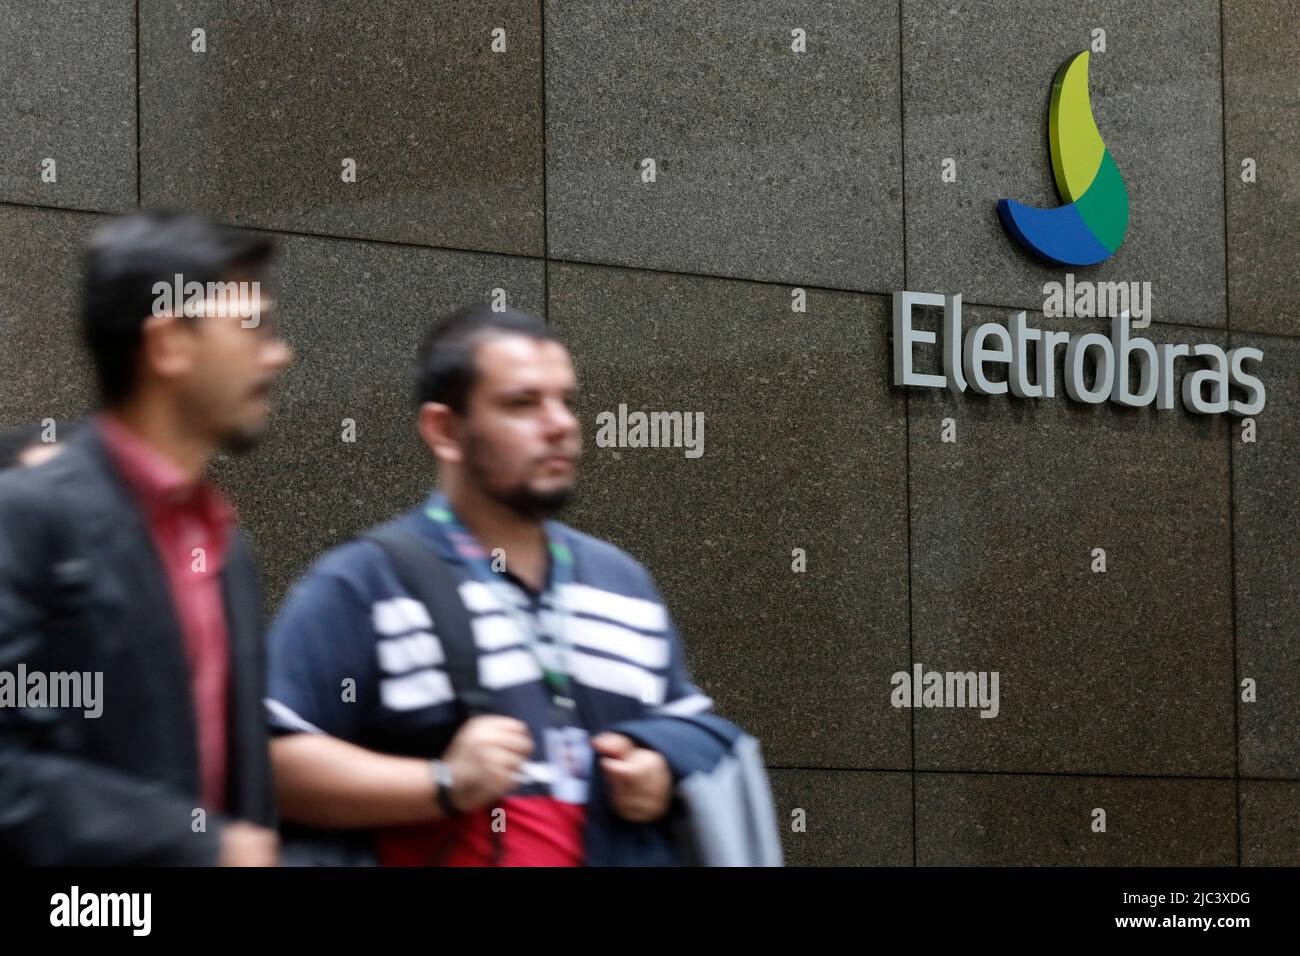 Eletrobras company logo. Brazilian electric utilities company building. State-owned holding of power supply, clean energy, under privatization Stock Photo